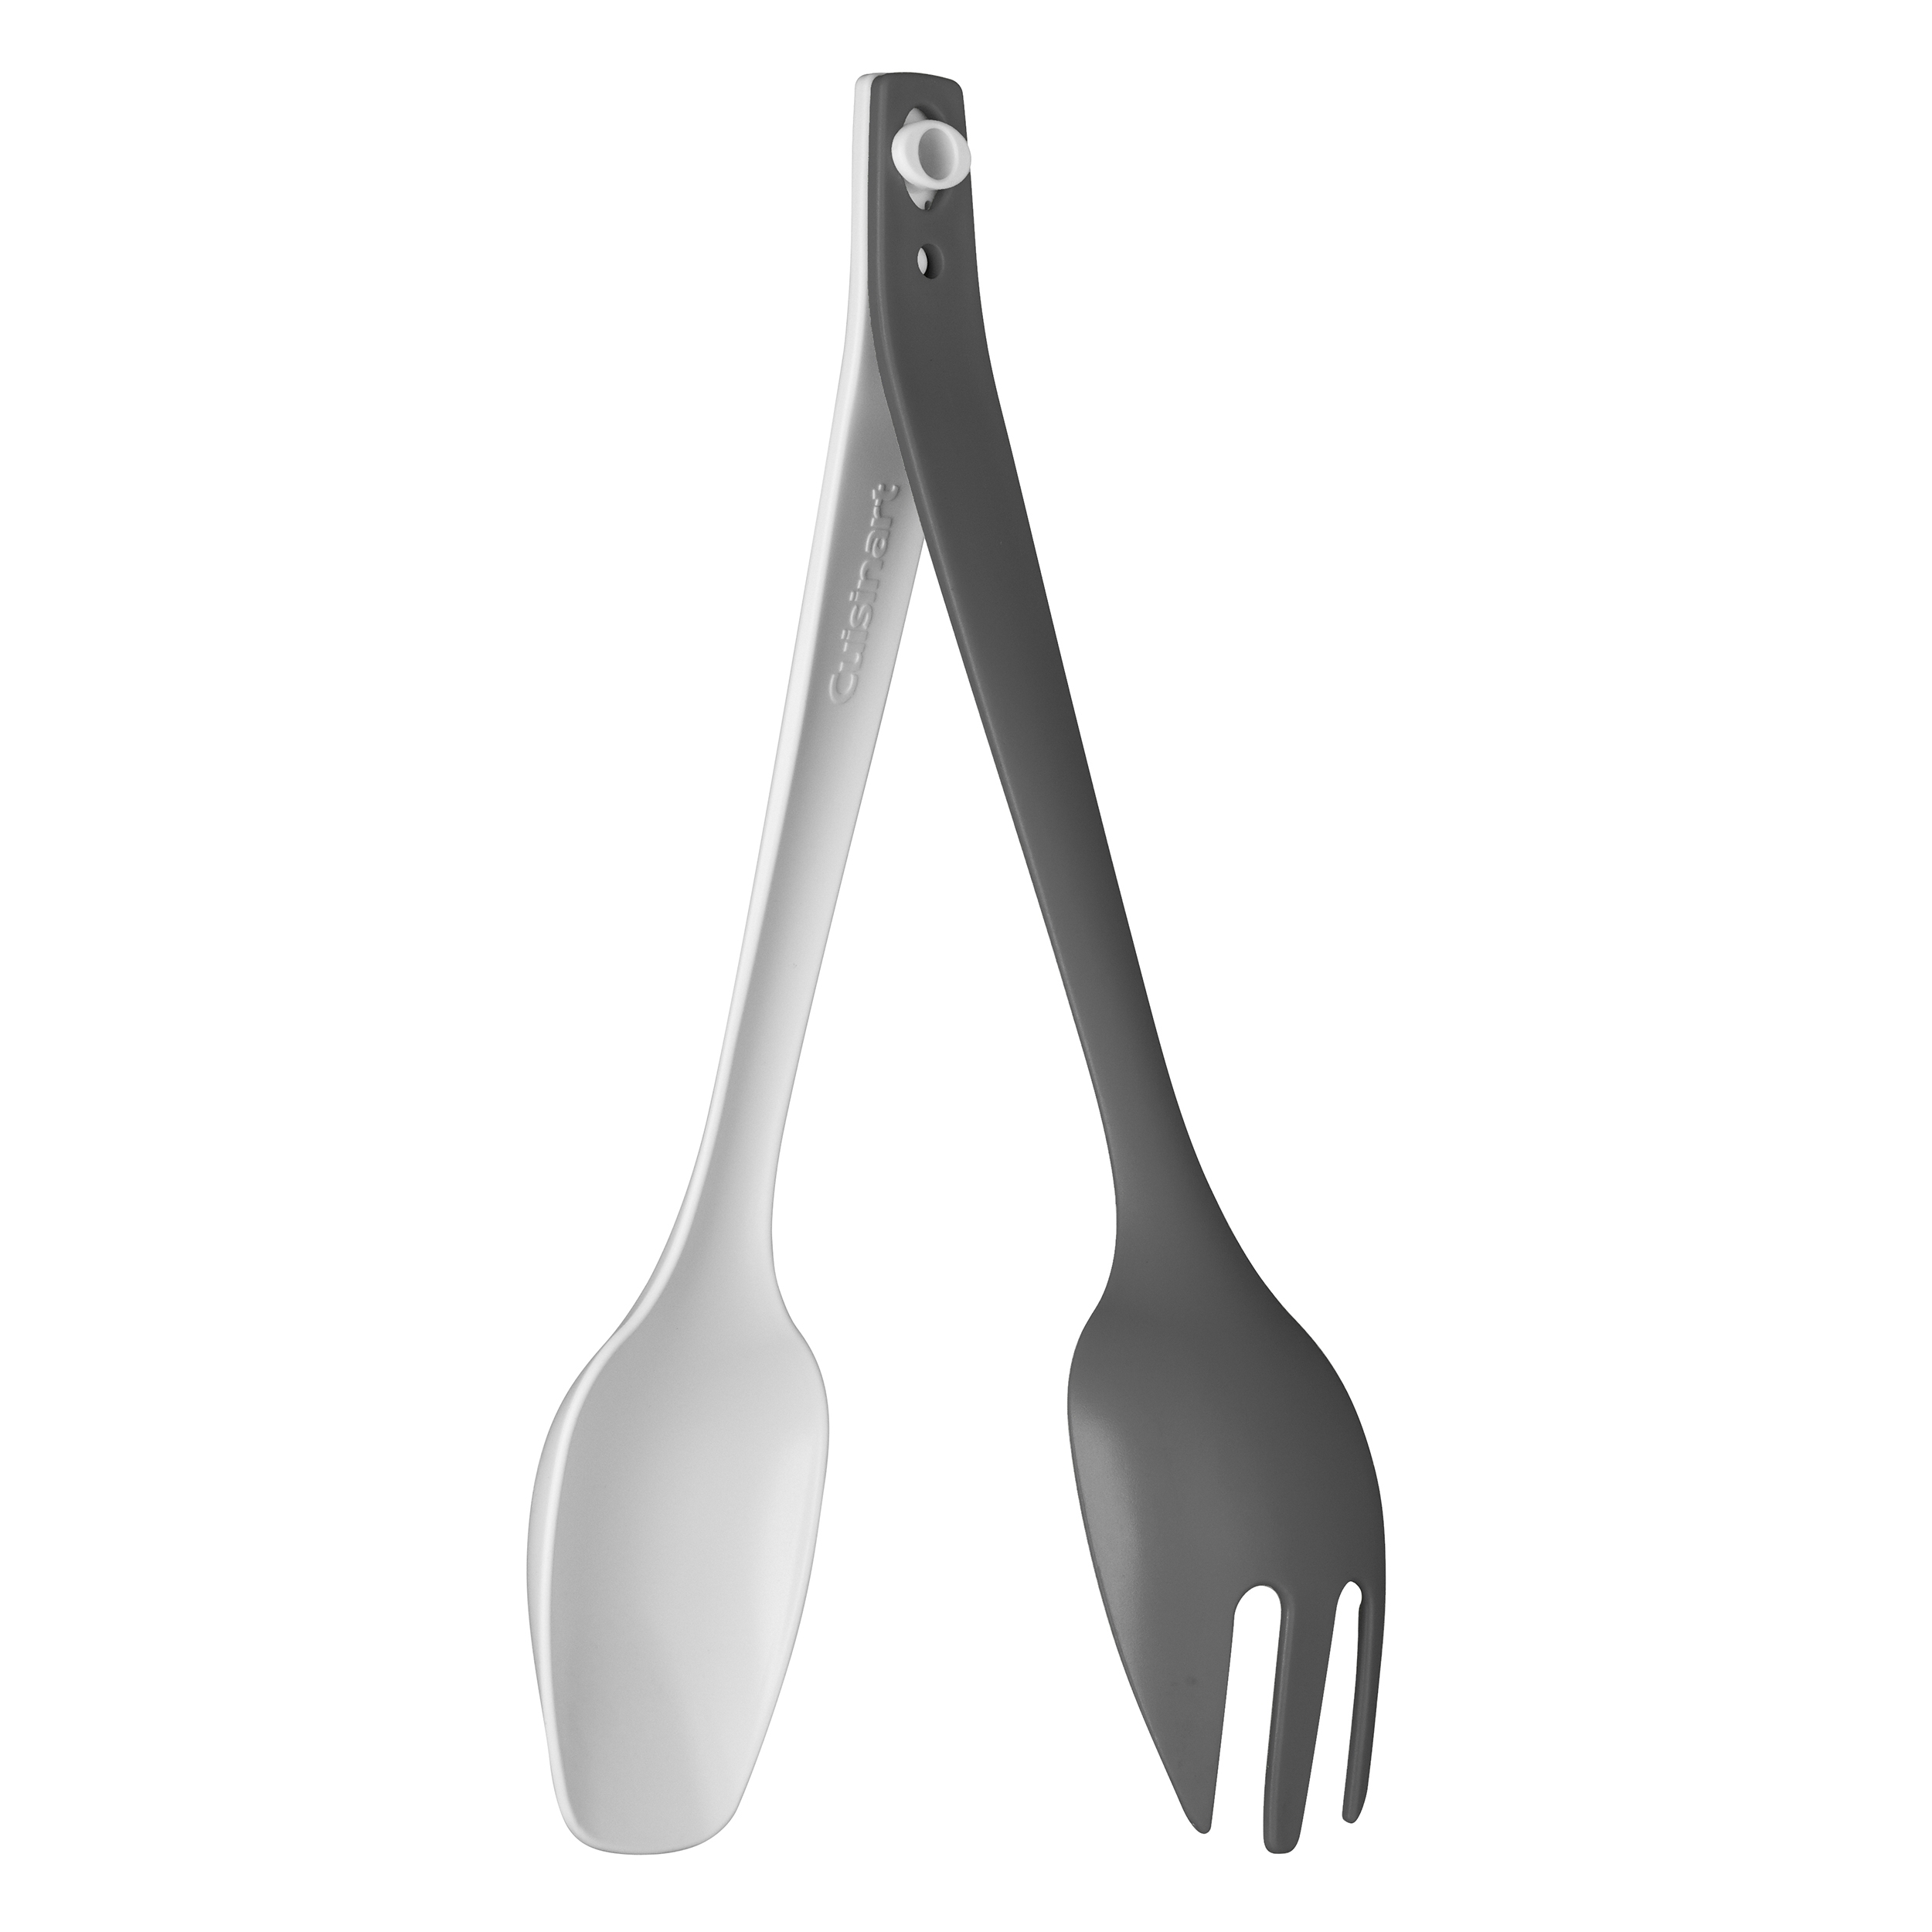 Discontinued Toss & Serve 2-in-1 Salad Tongs